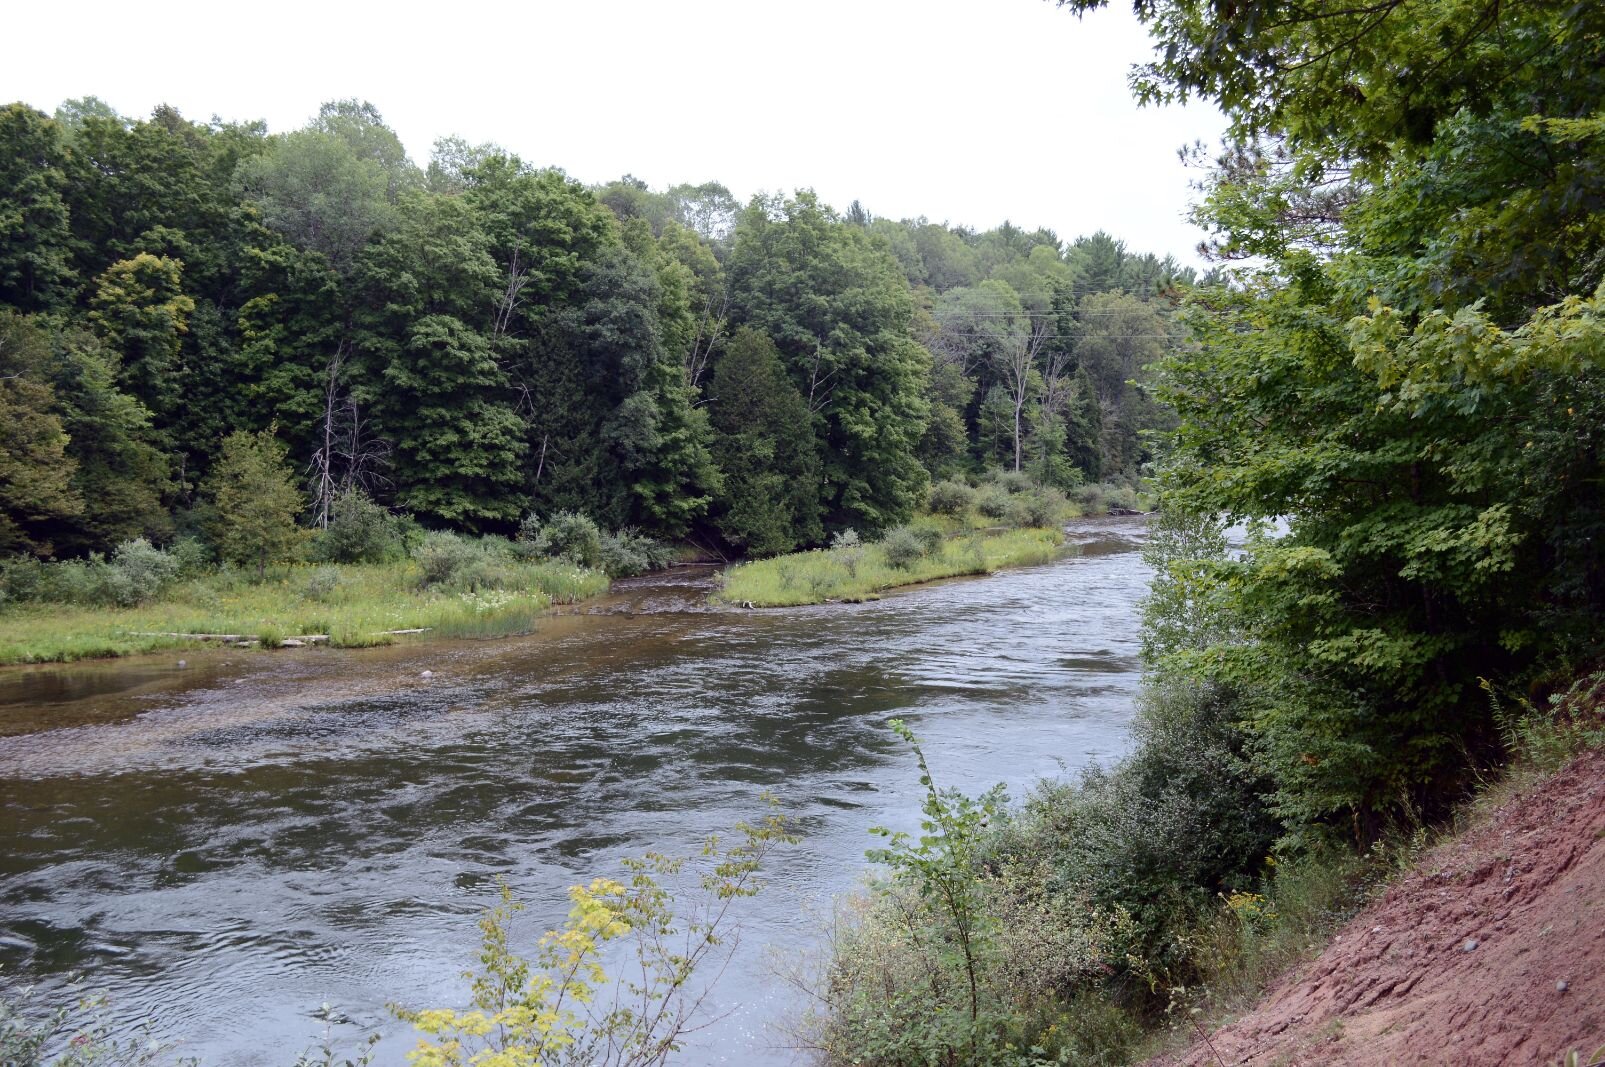 Overlooking the Manistee River, on the Upper River Road.